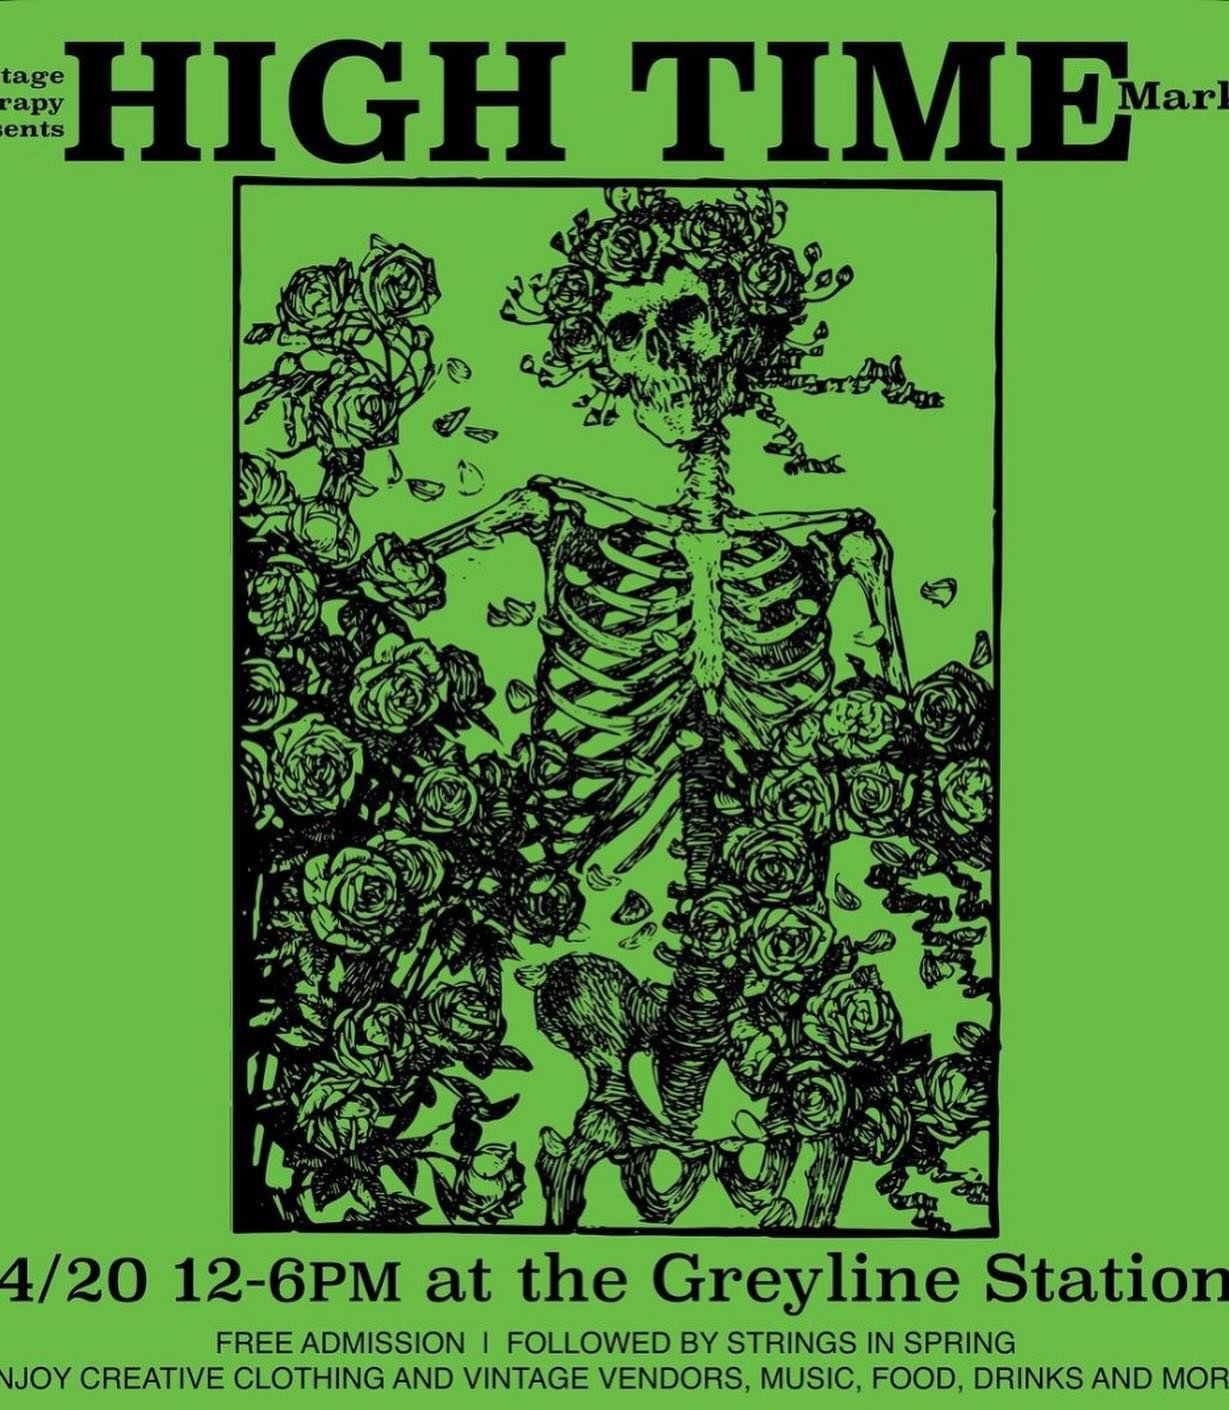 Come enjoy your Saturday with Greyline Station! 

We will be hosting the @vintagetherapy_lex High Time Market. This will be followed by Strings in the Spring, a fundraiser in collaboration with @oldnorthbar!

Don't forget to check out our newly opene